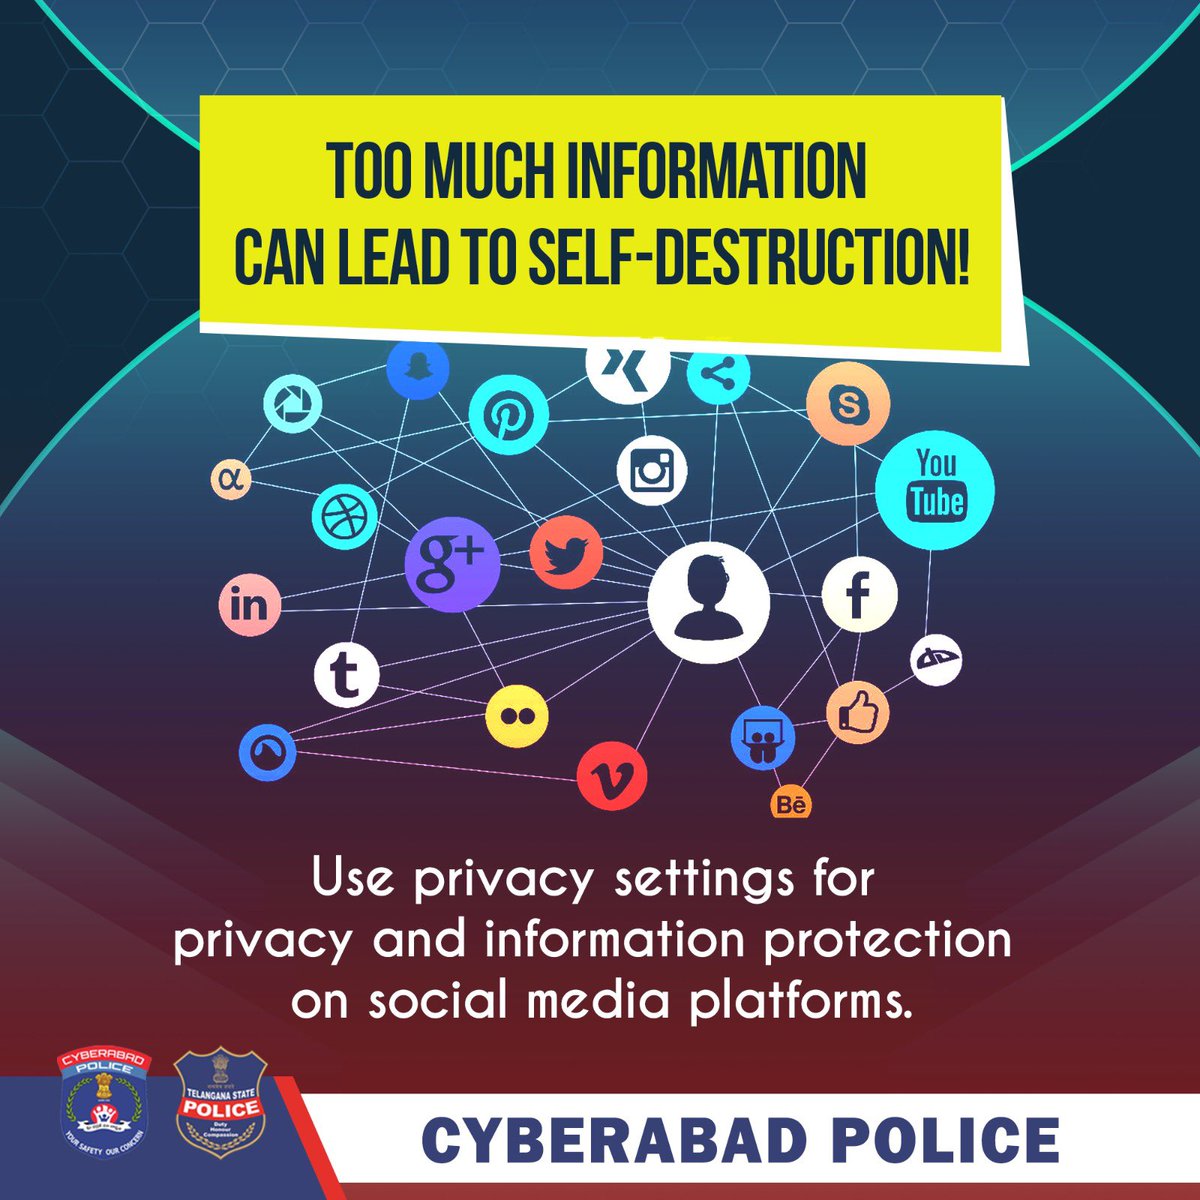 Just give it a thought: is it really important for you to put all your information directly or indirectly on social media? Are you safe?  #SocialMediaAwareness #CyberSafety #OnlineSafety #CyberabadPolice